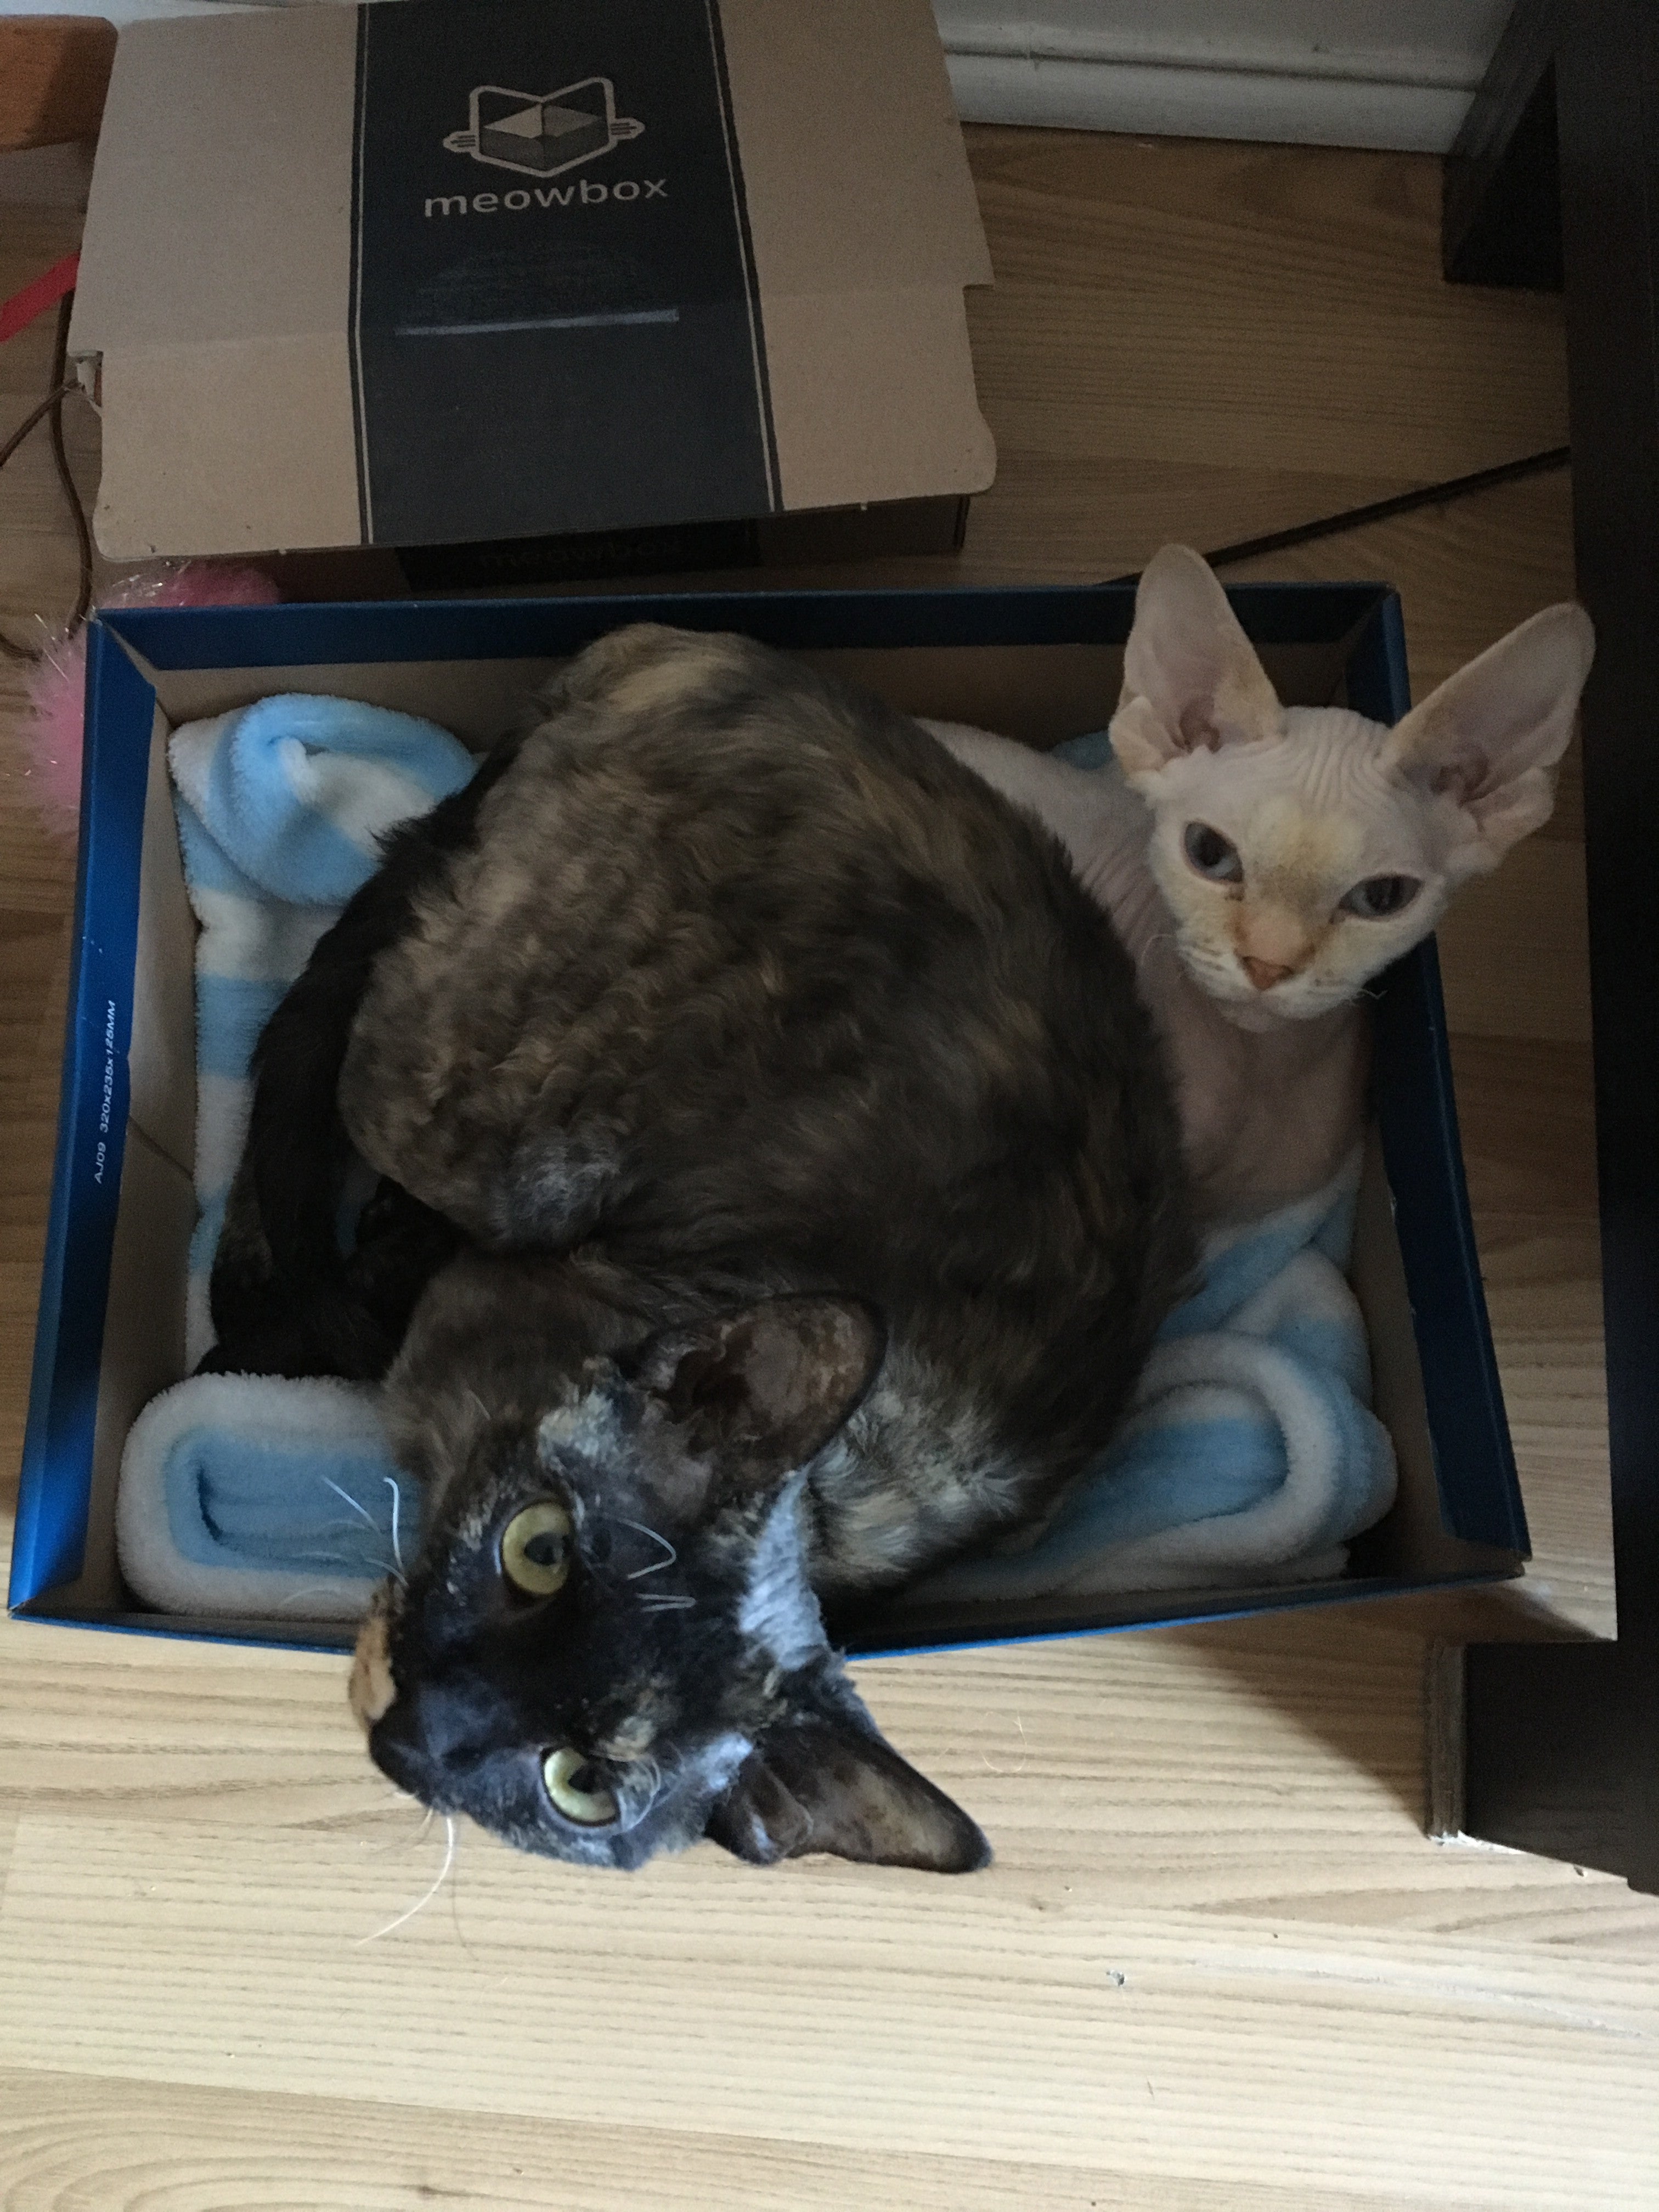 Two cats in a box, on a blanket